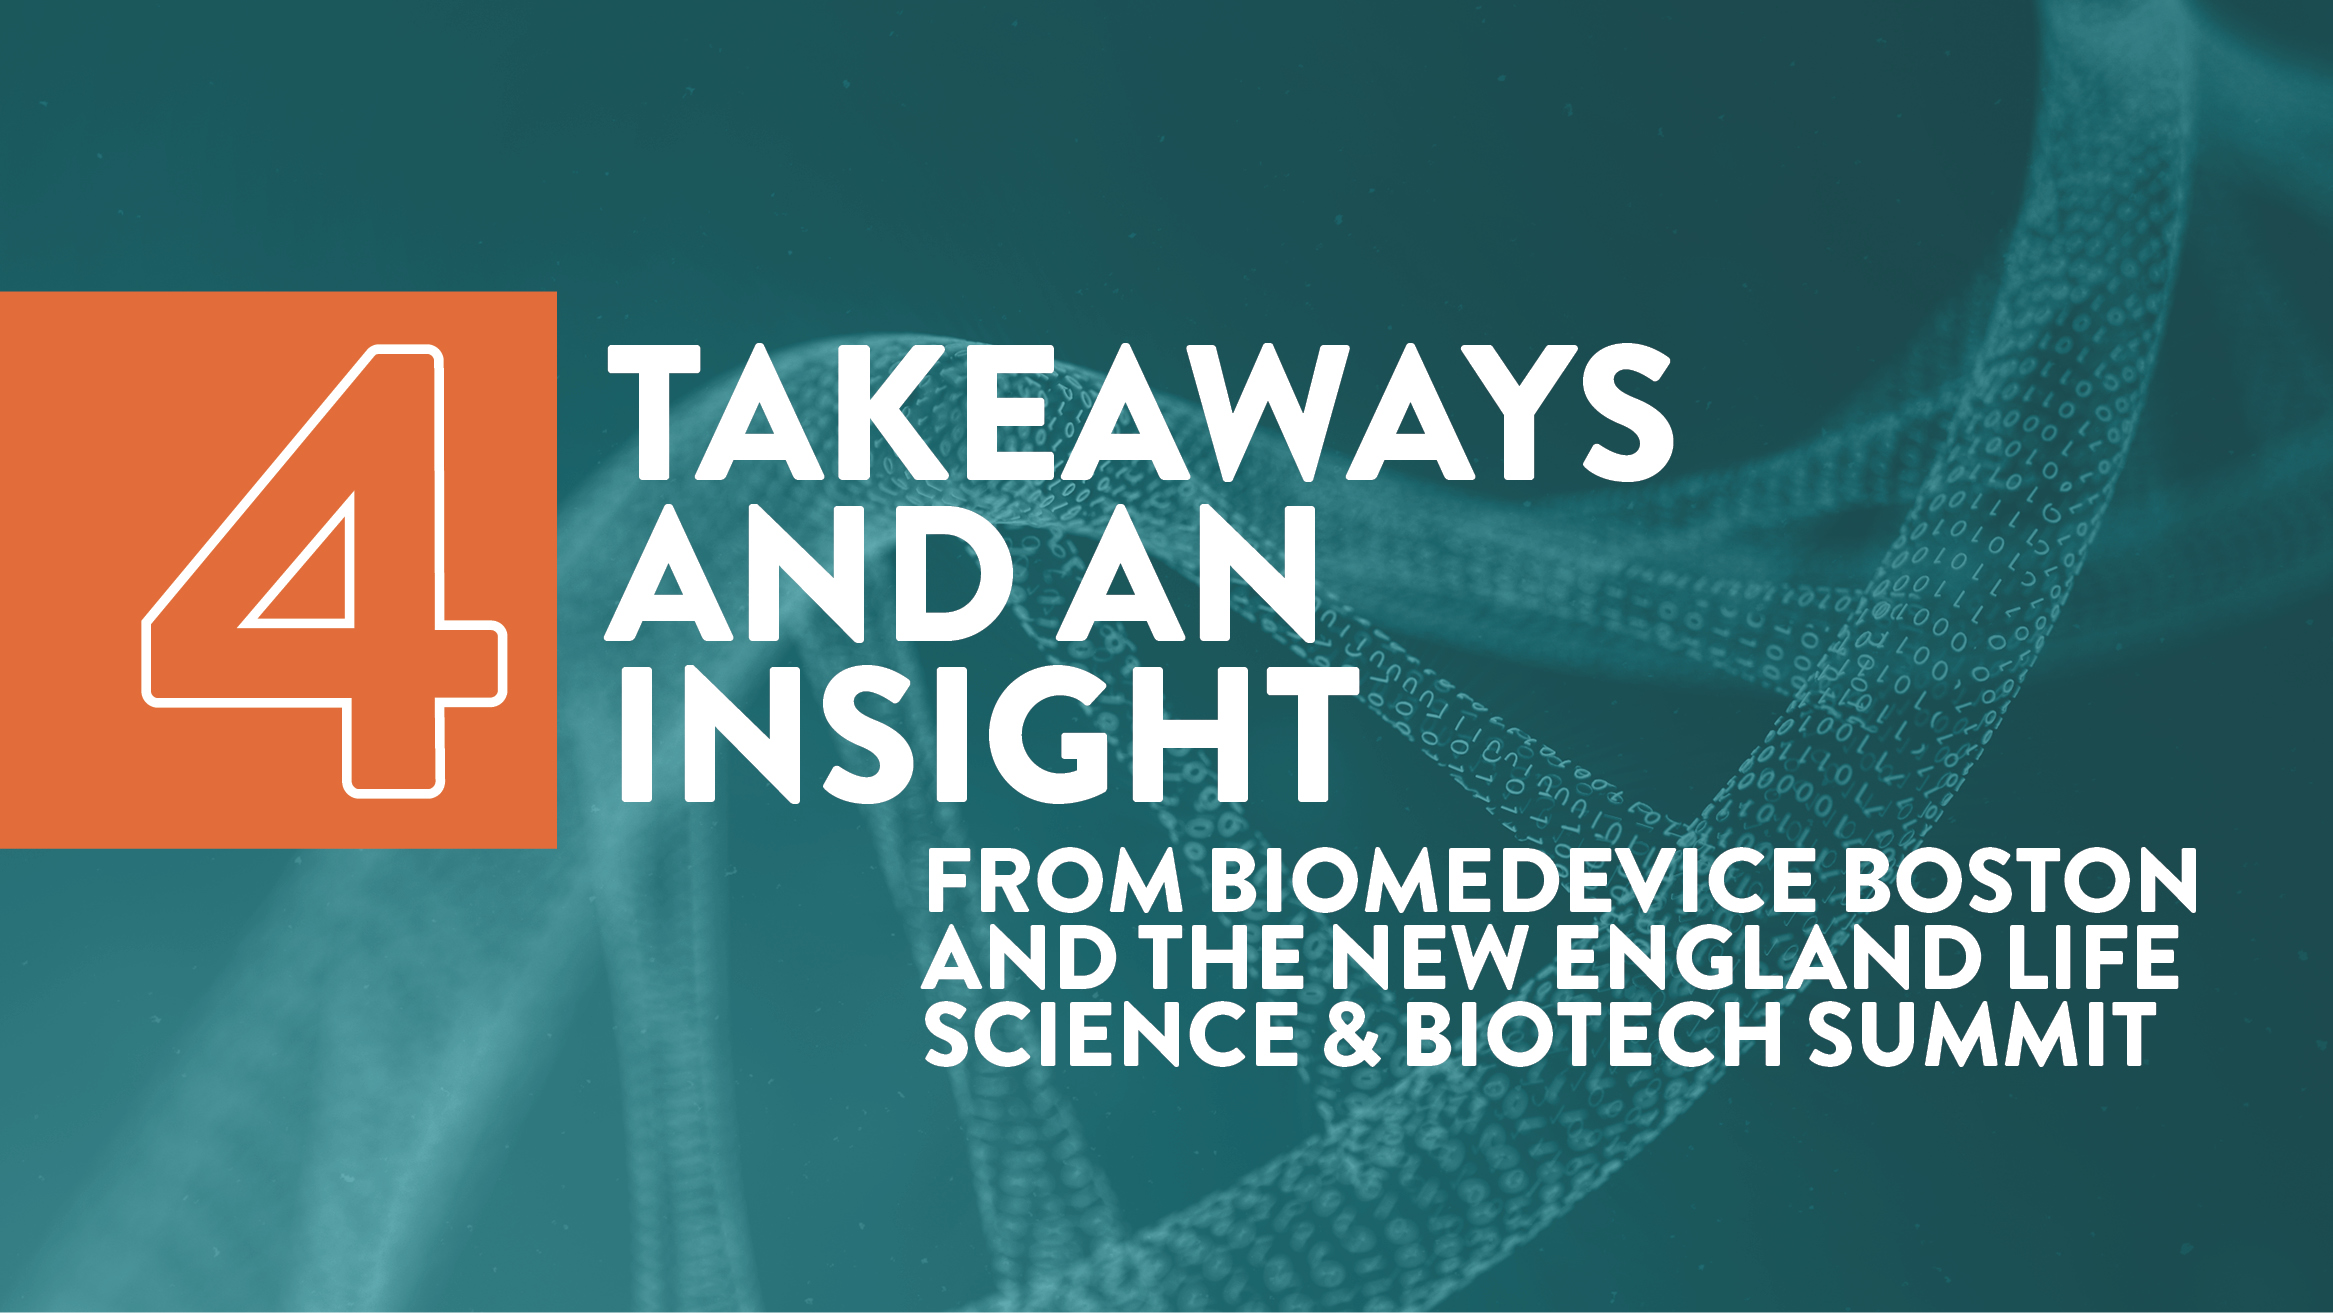 text 4 takeaways and an insight from BIOMEDevice Boston and the New England Life Science & BioTech Summit